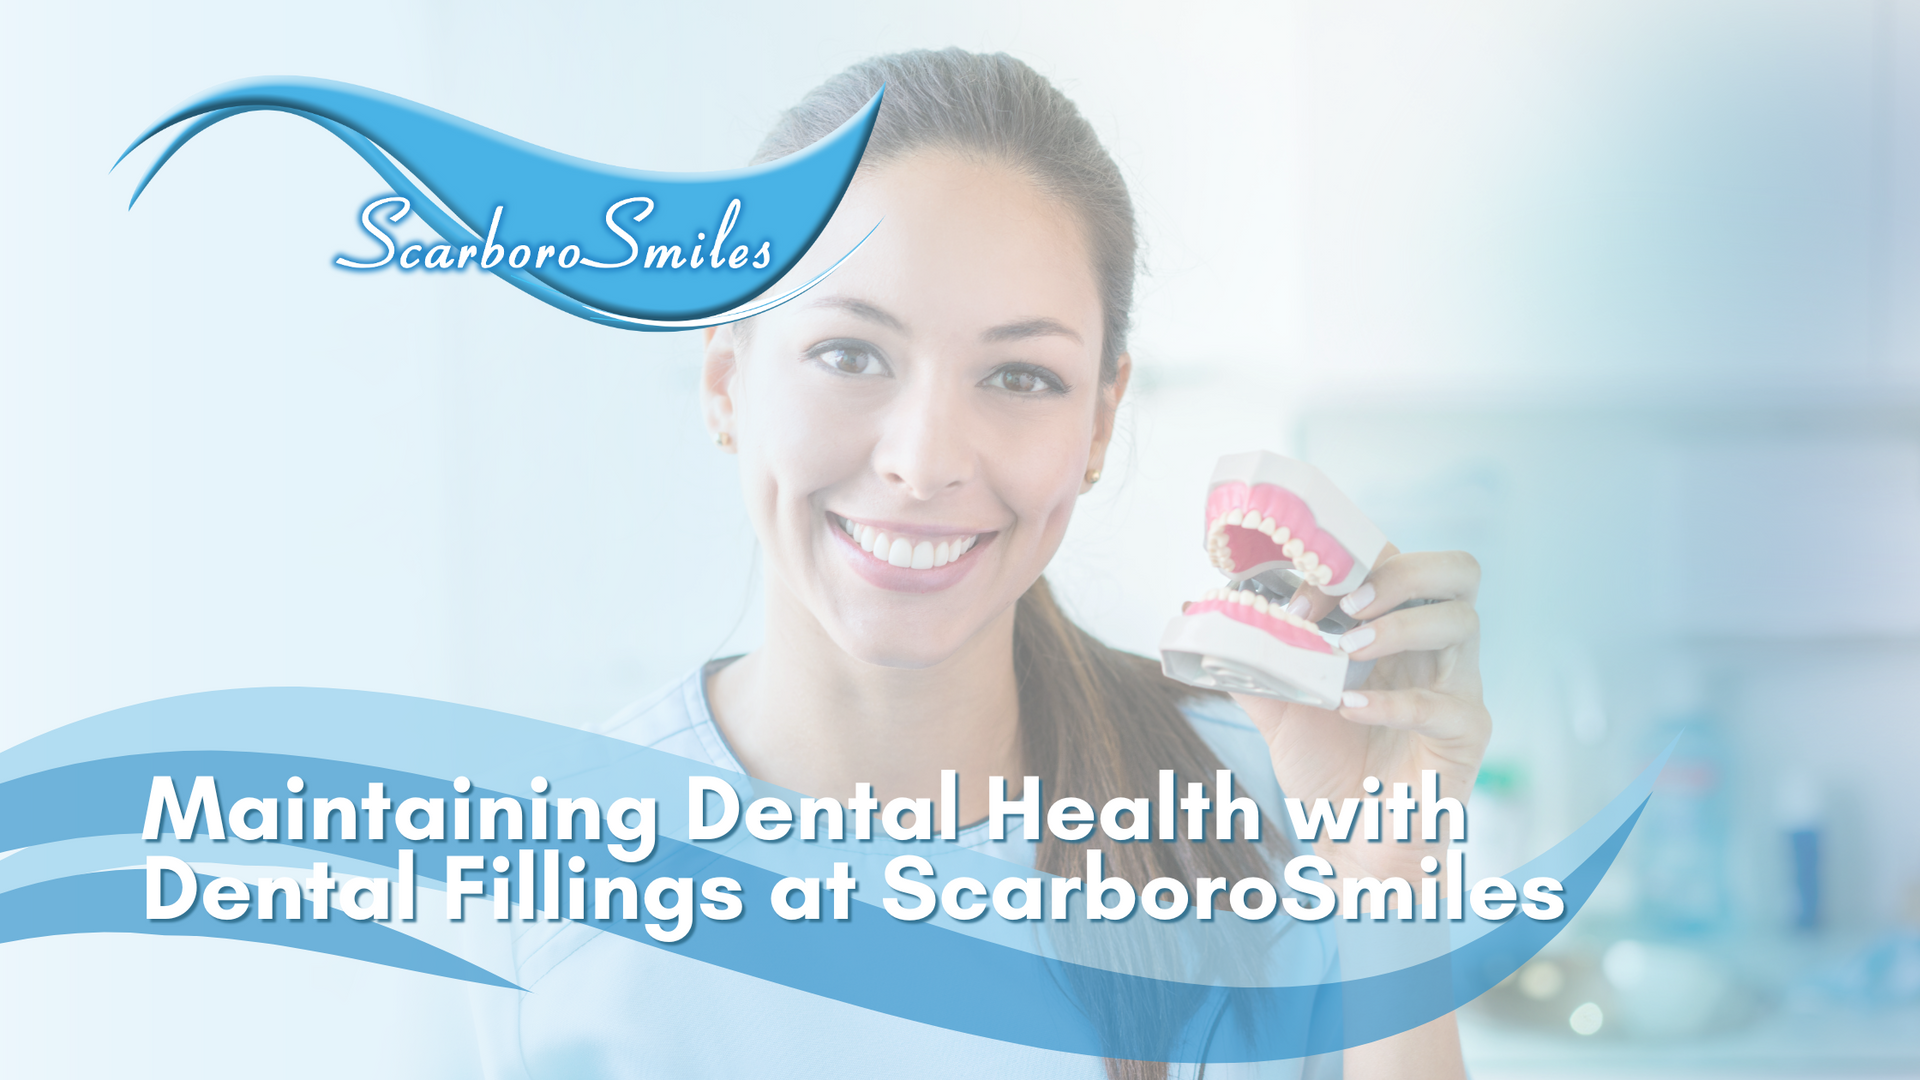 A woman is smiling while holding a model of her teeth.